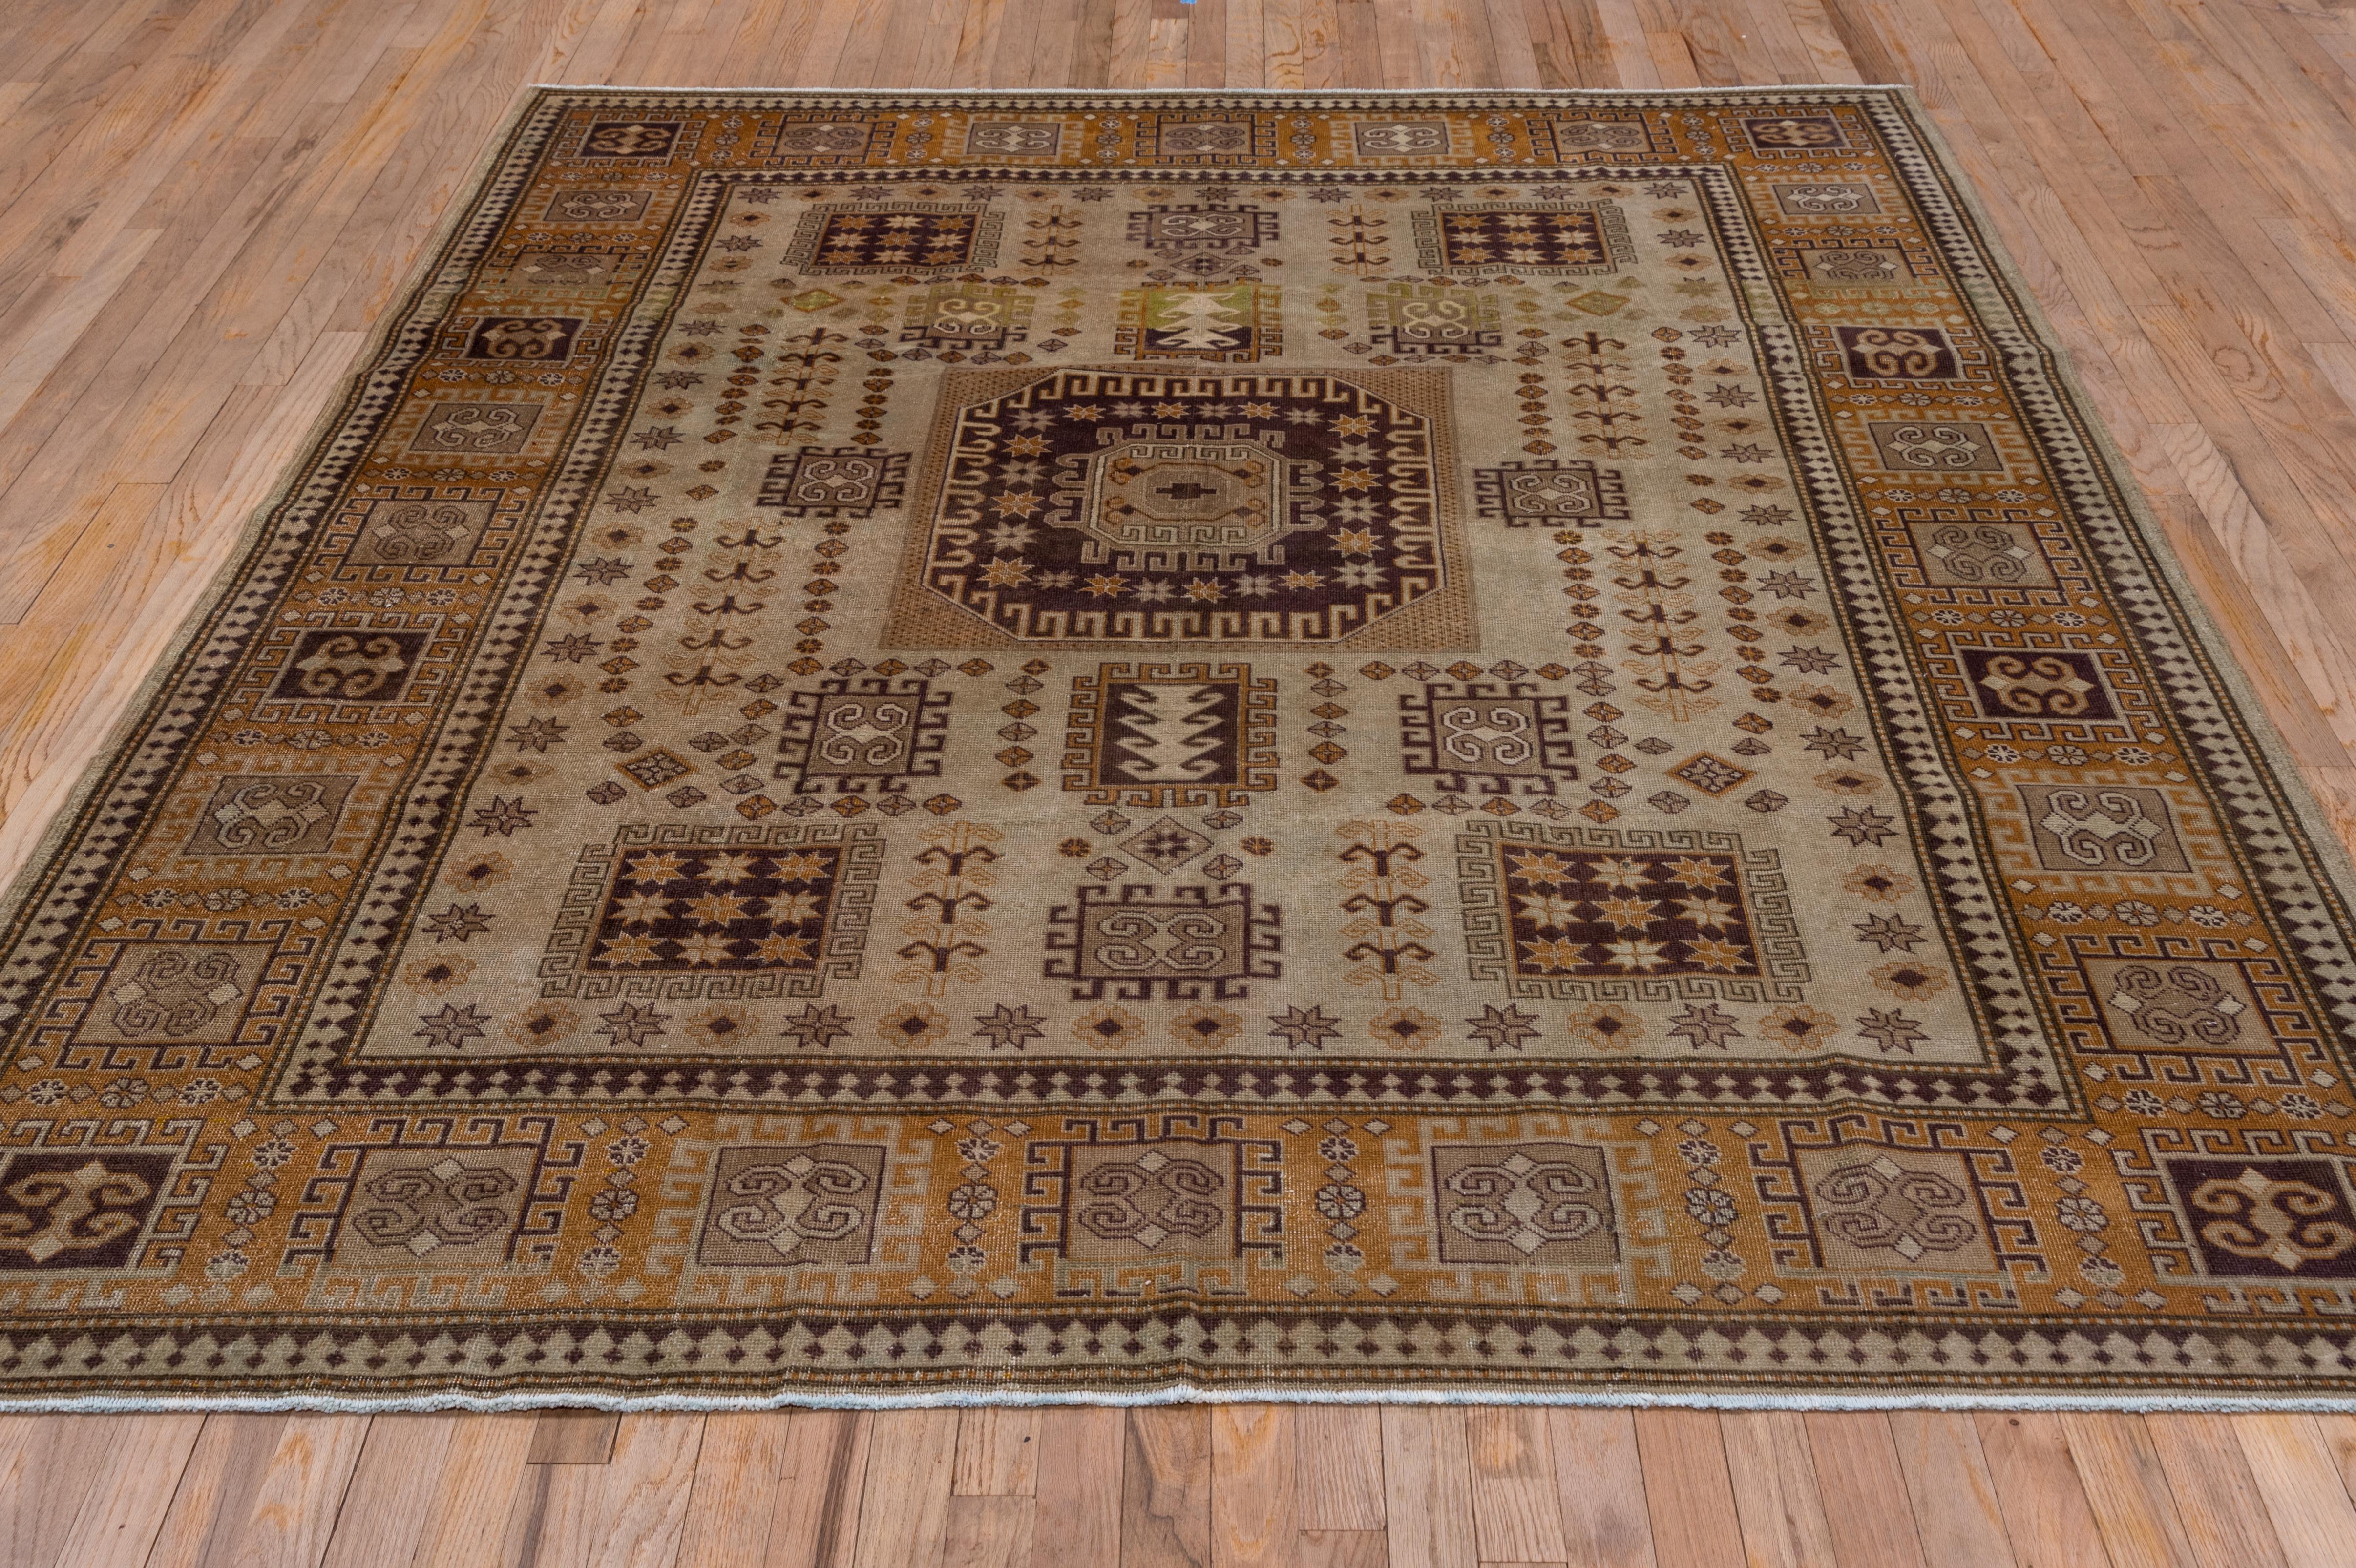 In the Caucasian Karachof Kazak style, this southern European carpet shows internally starred and hooked brick octagonal medallion on a sand field with characteristic star-filled boxes and other hooked quadrilaterals. The ochre border shows more